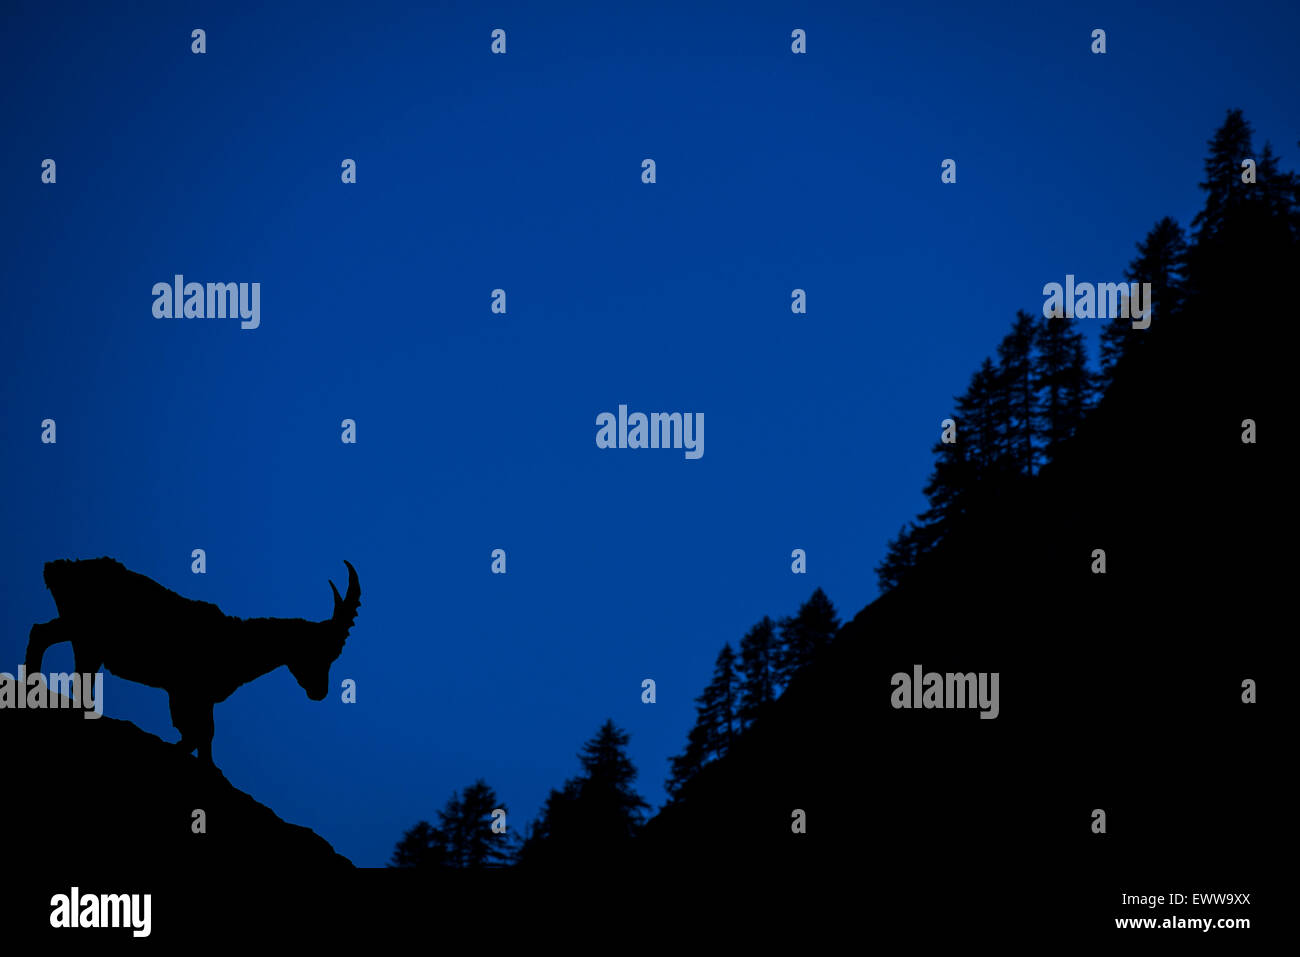 Alpine ibex (Capra ibex) silhouetted against mountain slope with pine trees at night, Alps Stock Photo